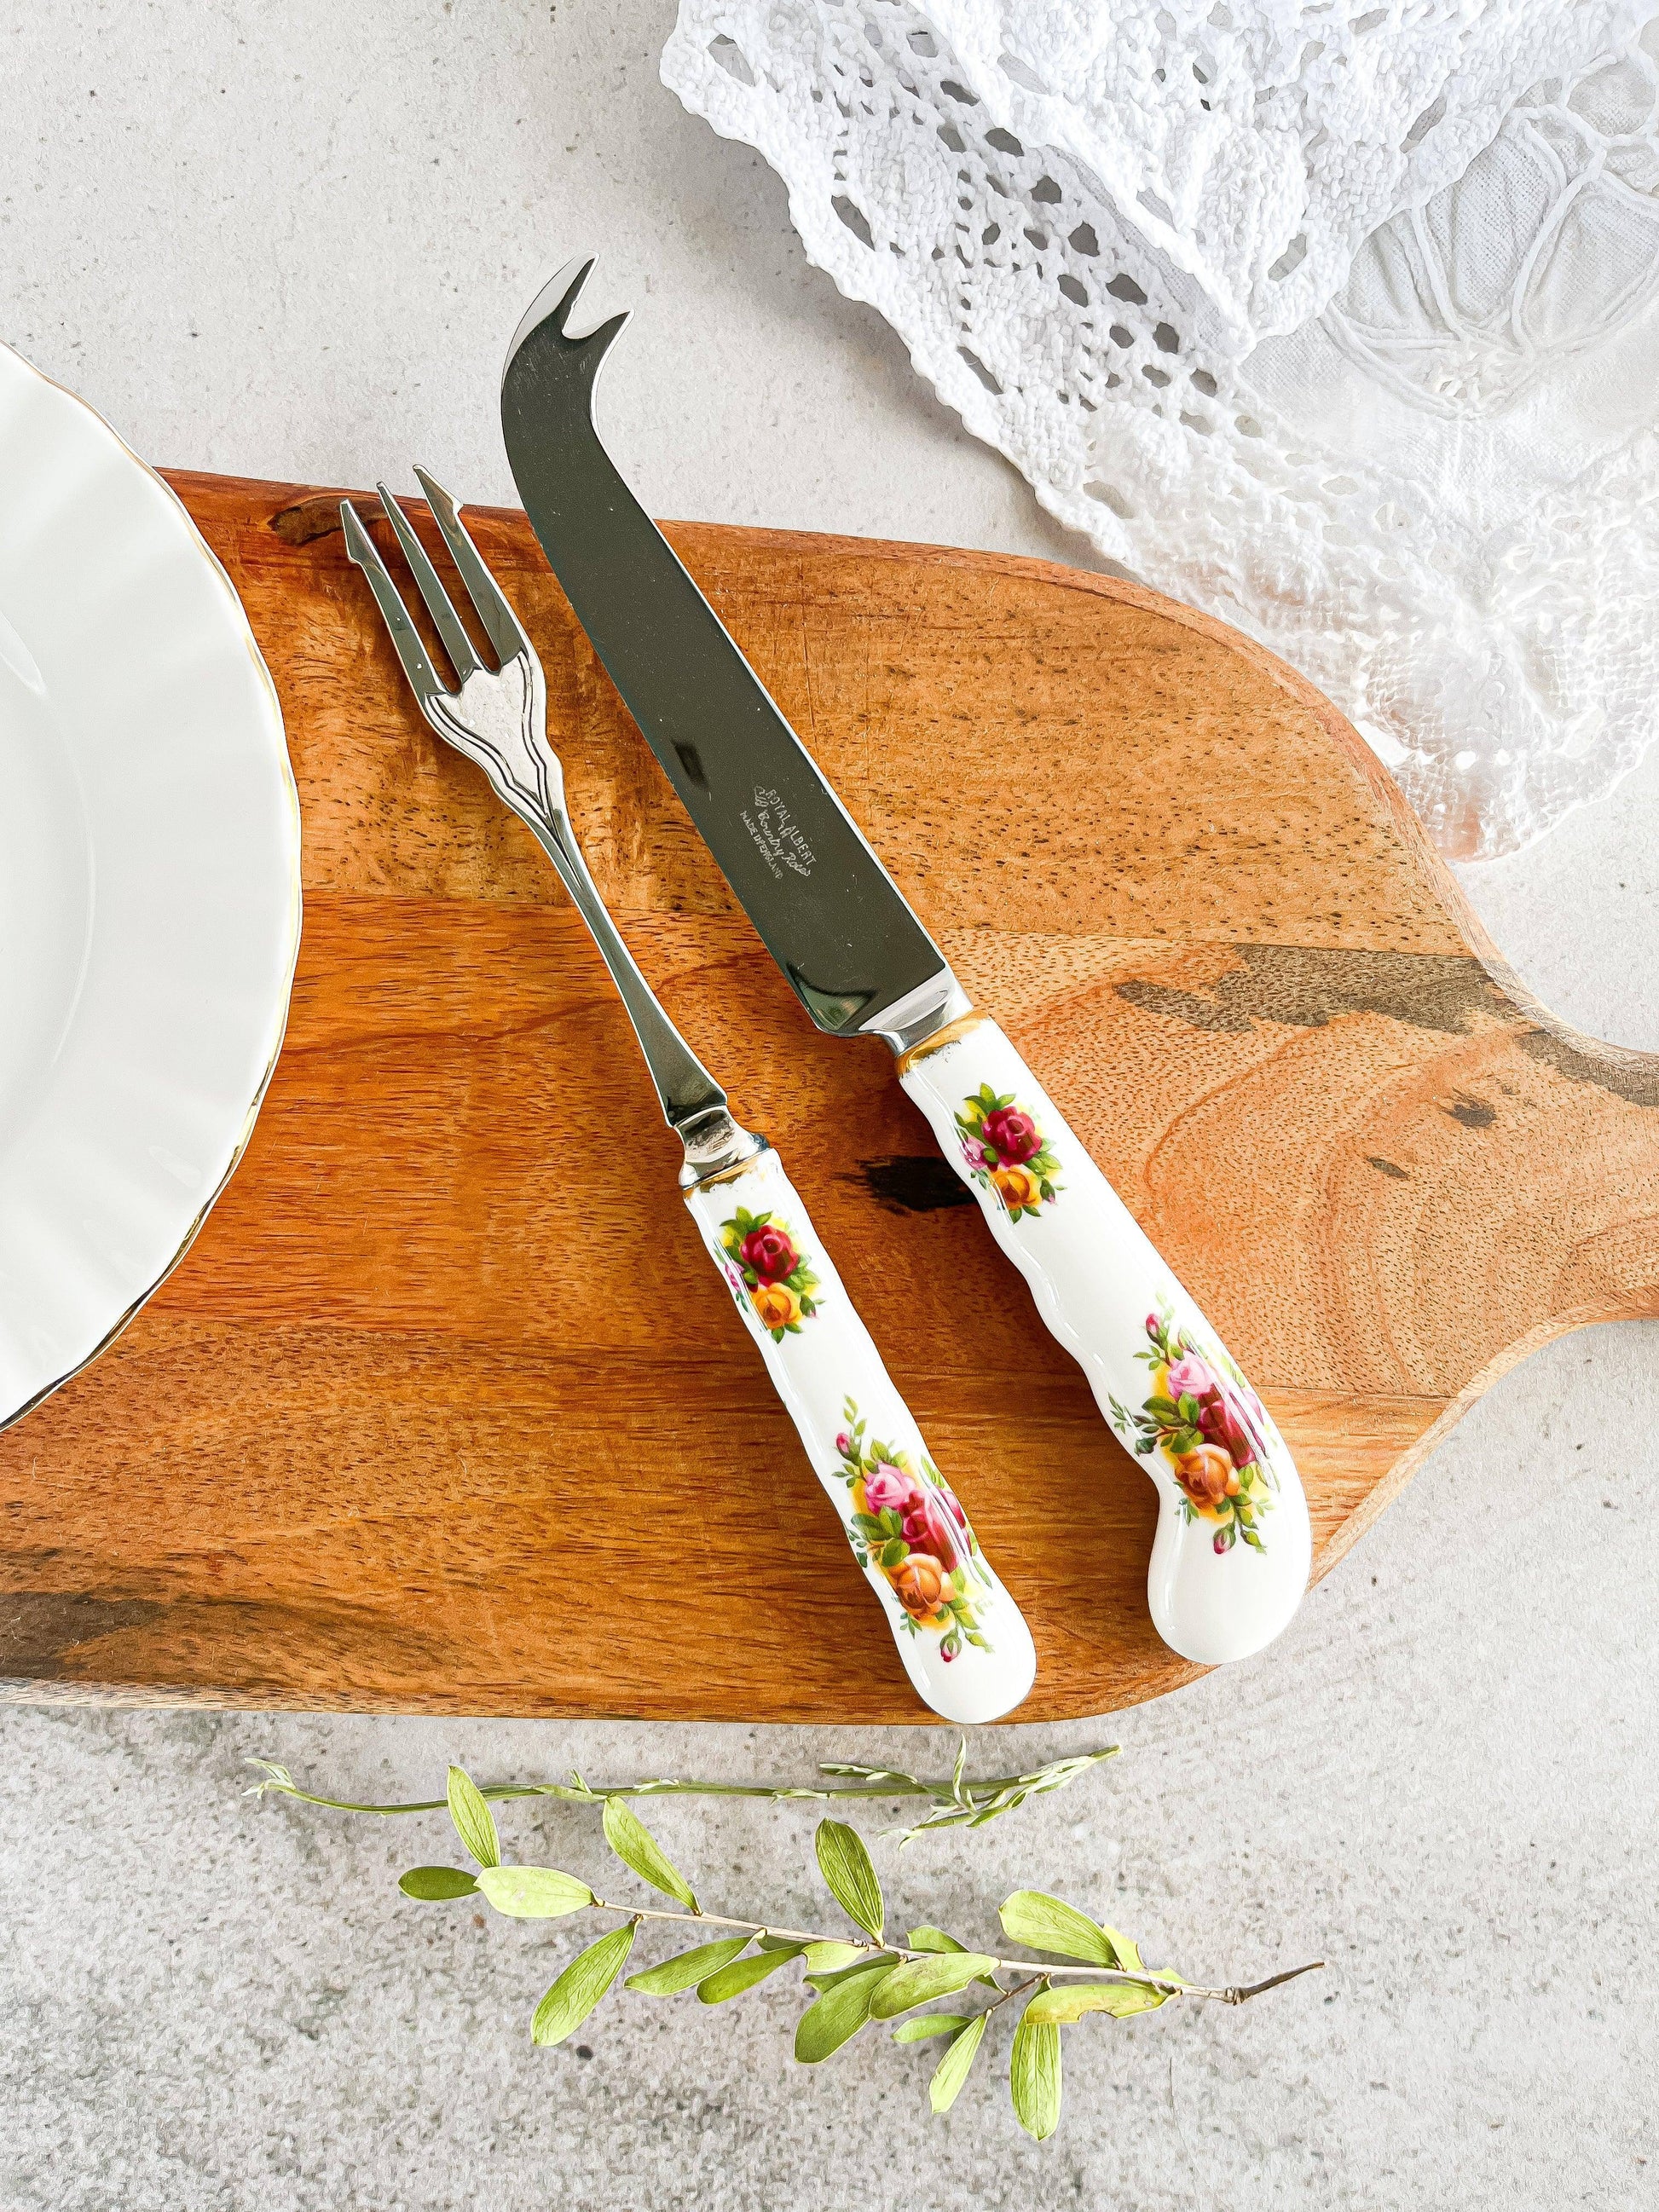 Royal Albert Cheese Knife & Pickle Fork Set - Old Country Roses - SOSC Home